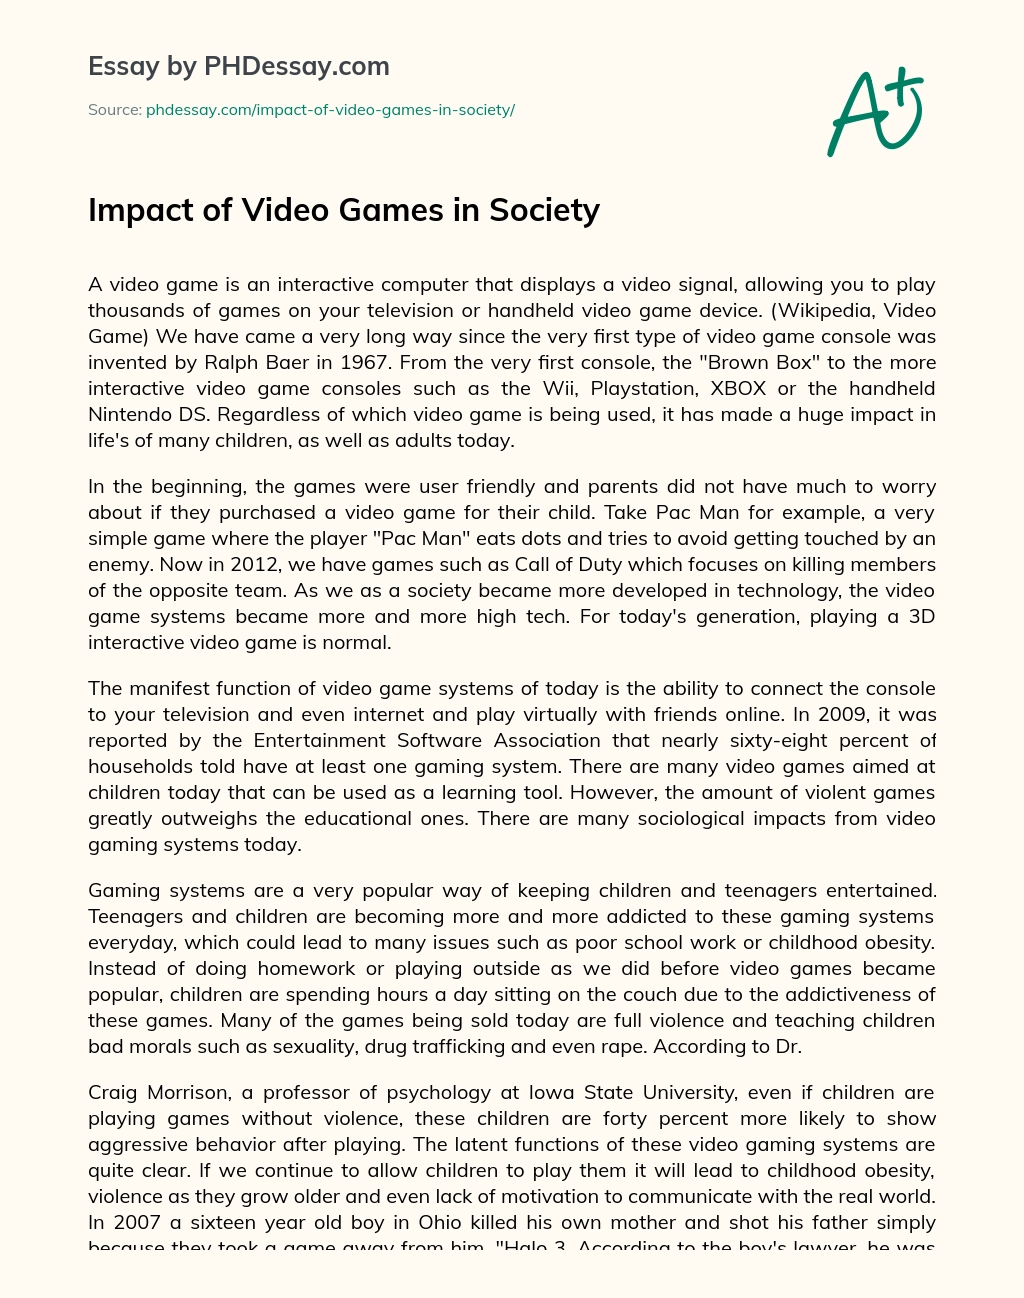 Impact of Video Games in Society essay